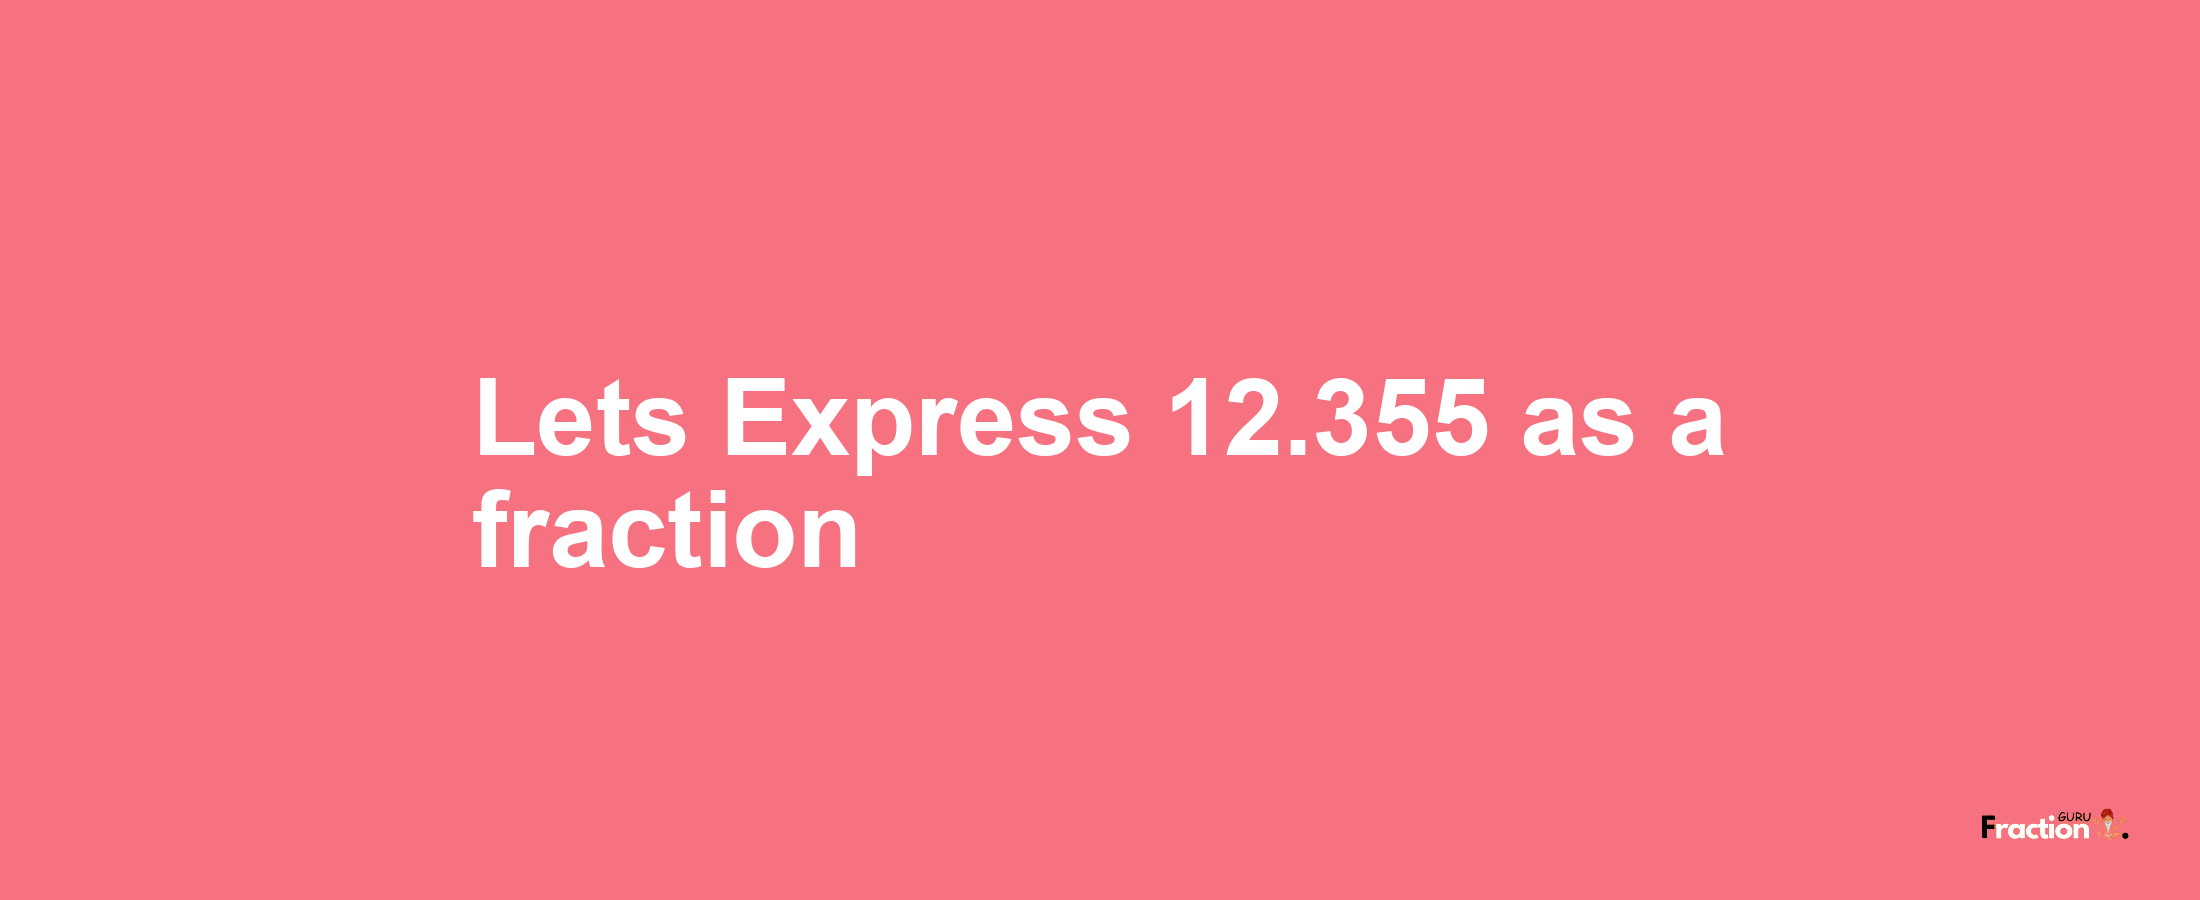 Lets Express 12.355 as afraction